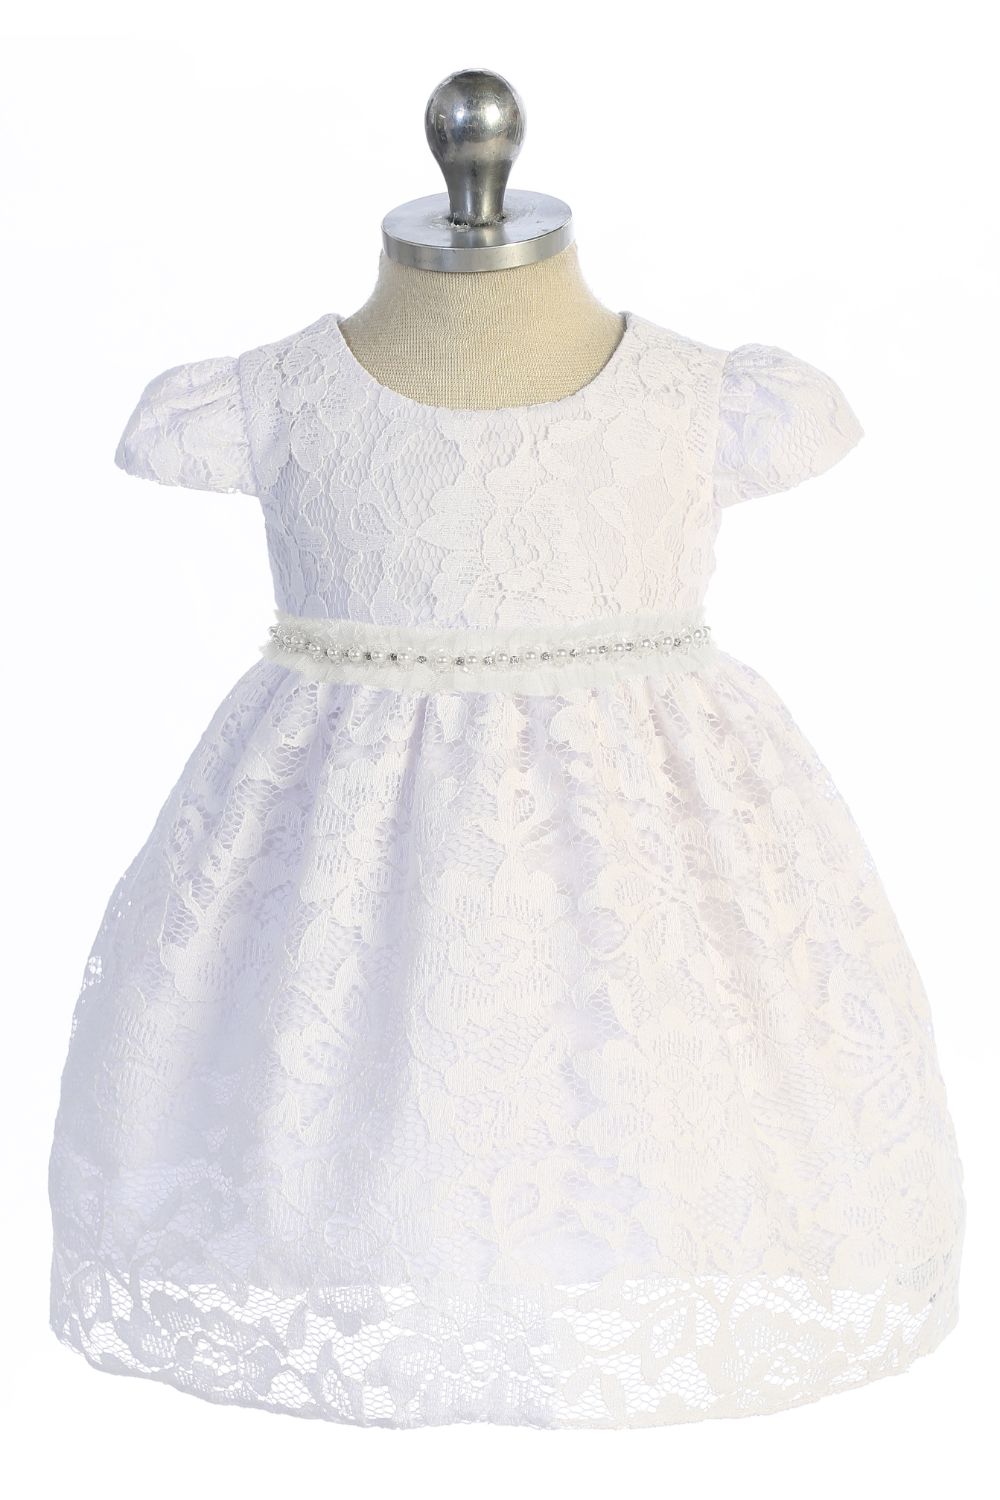 Dress - All Lace Baby Dress With V Back & Bow And Mesh Pearl Trim